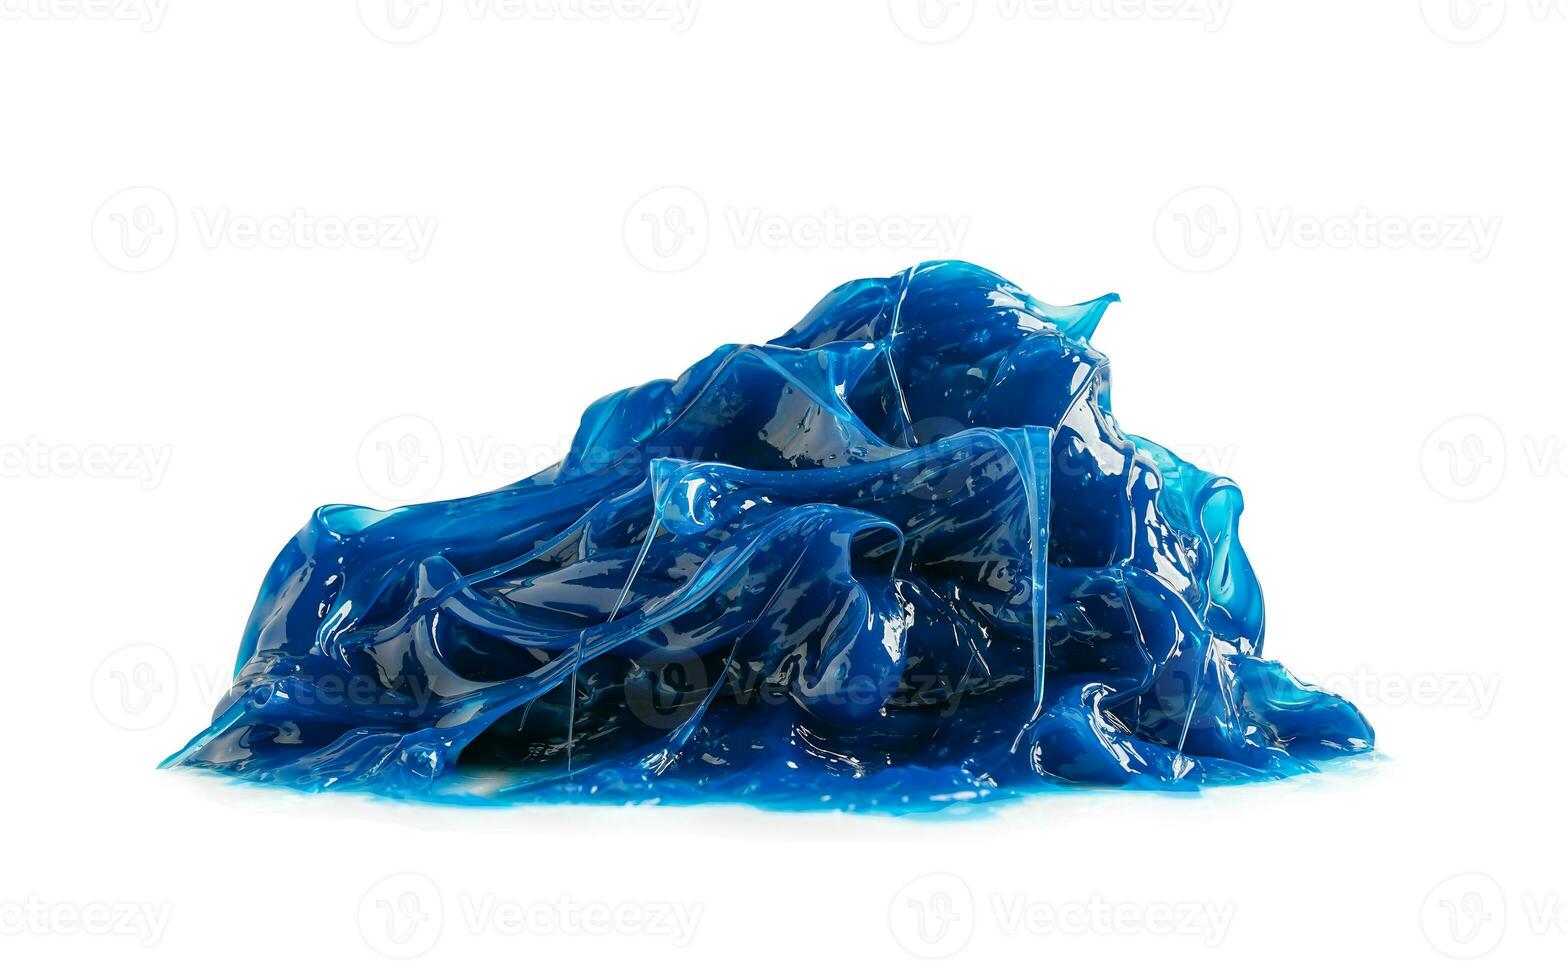 Grease, Blue premium quality synthetic lithium complex grease isolated on white background with clipping path. photo